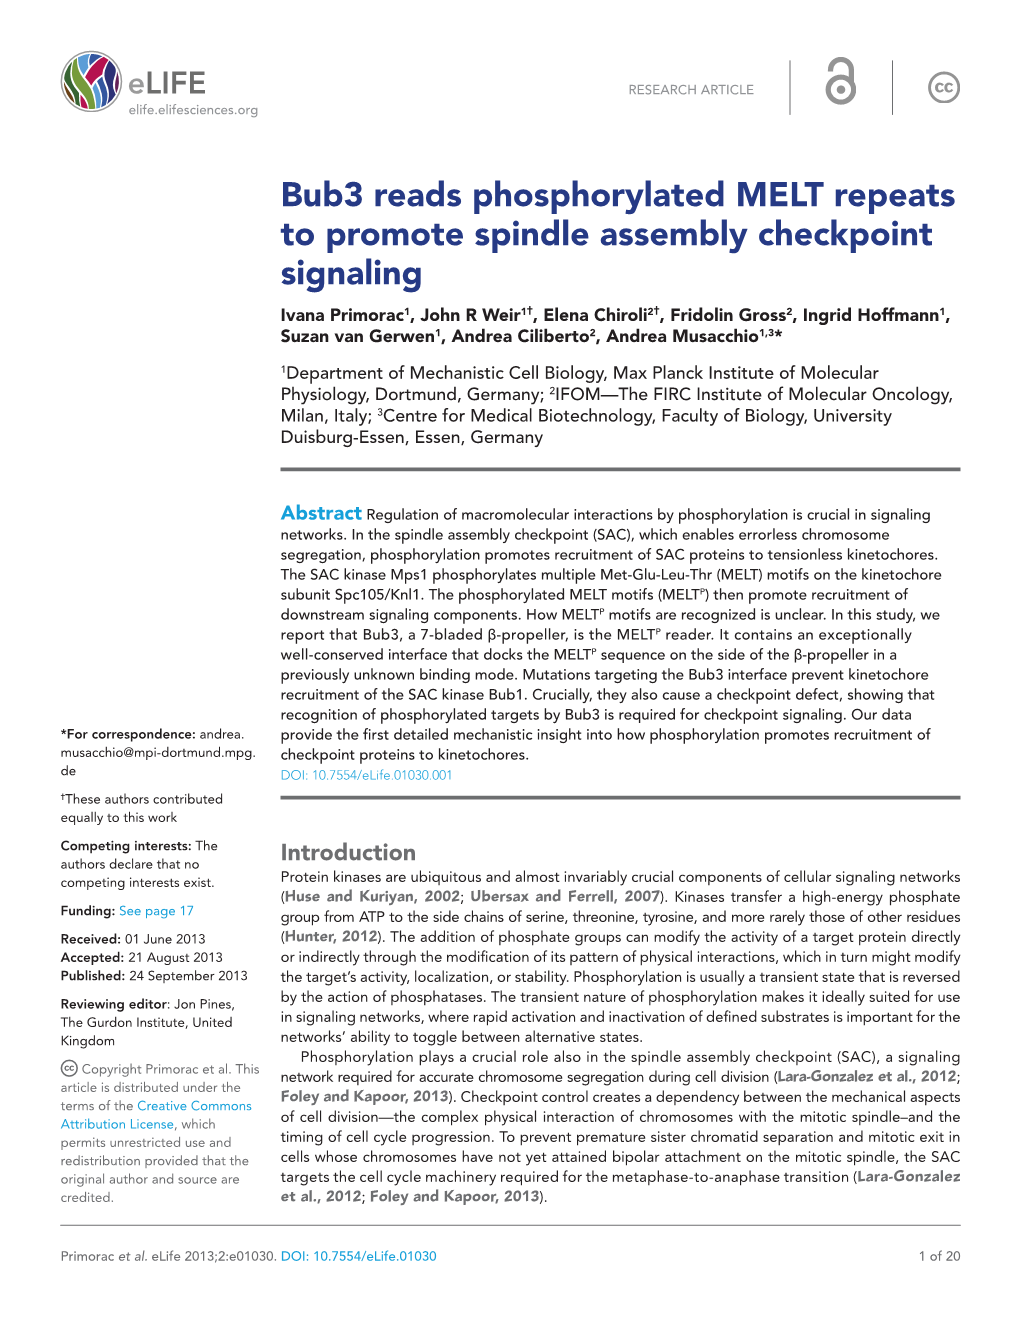 Bub3 Reads Phosphorylated MELT Repeats to Promote Spindle